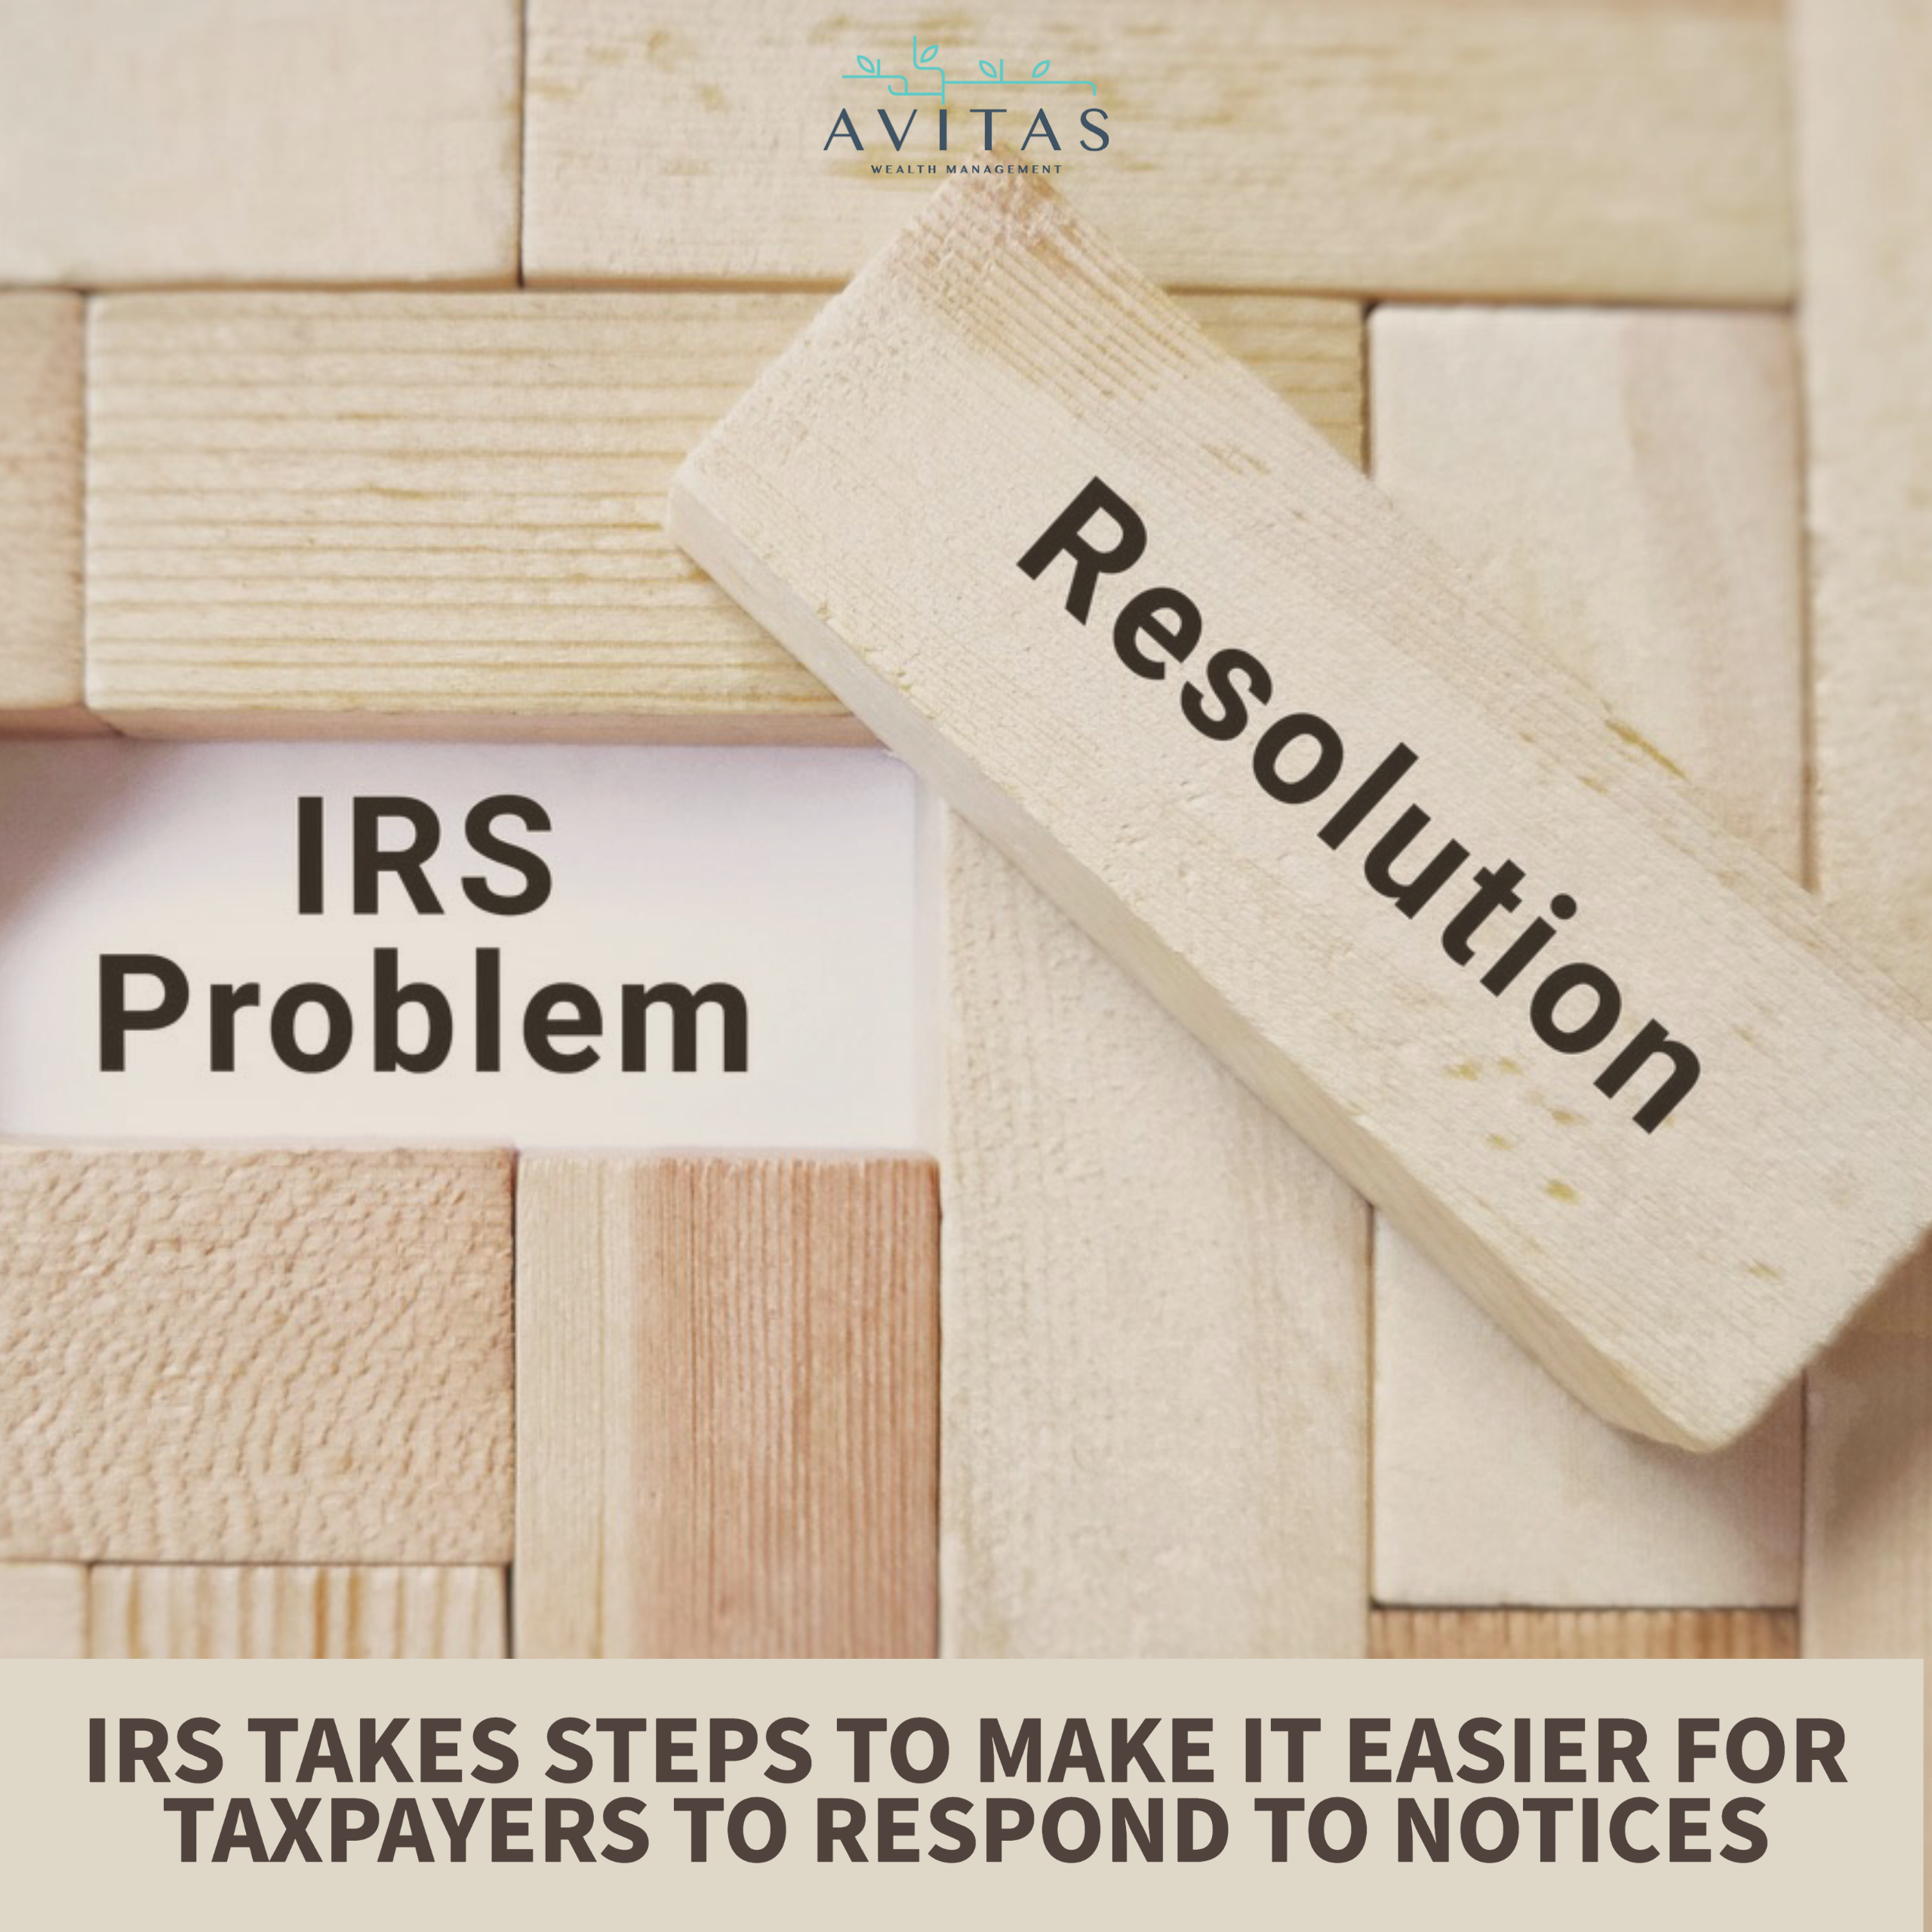 IRS Takes Steps To Make It Easier For Taxpayers To Respond To Notices